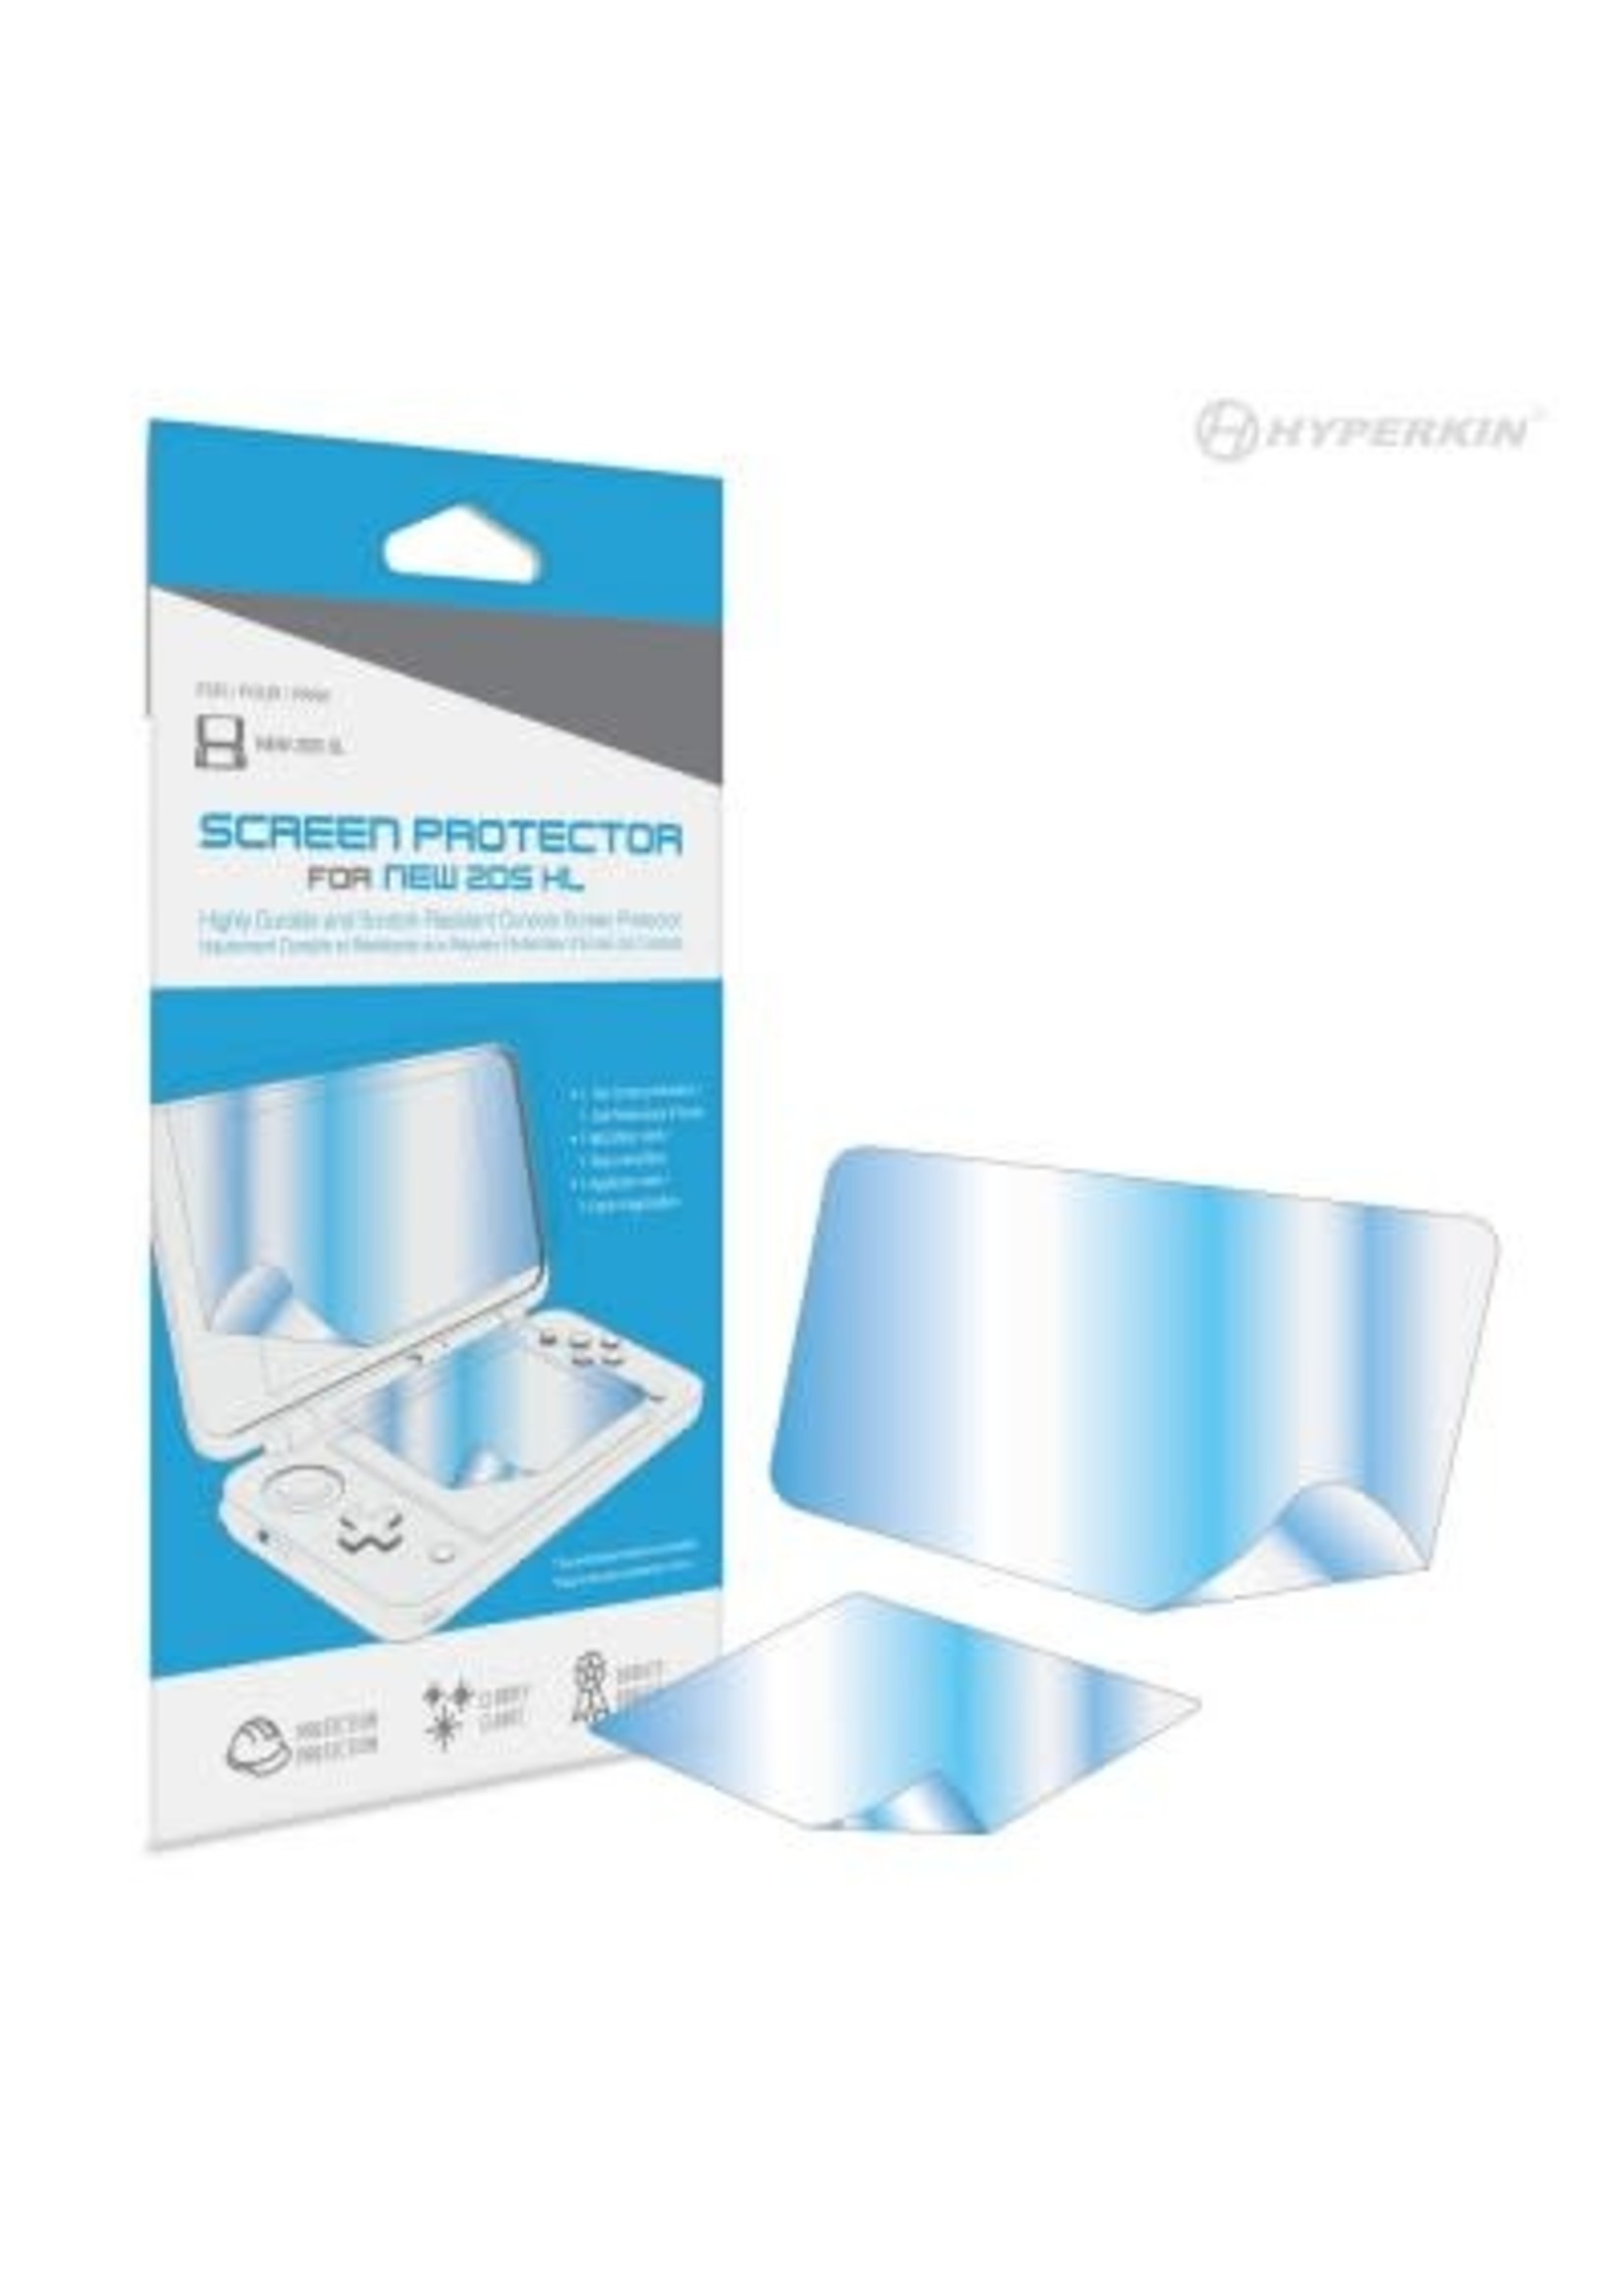 Nintendo 3DS New 2DS XL Screen Protector